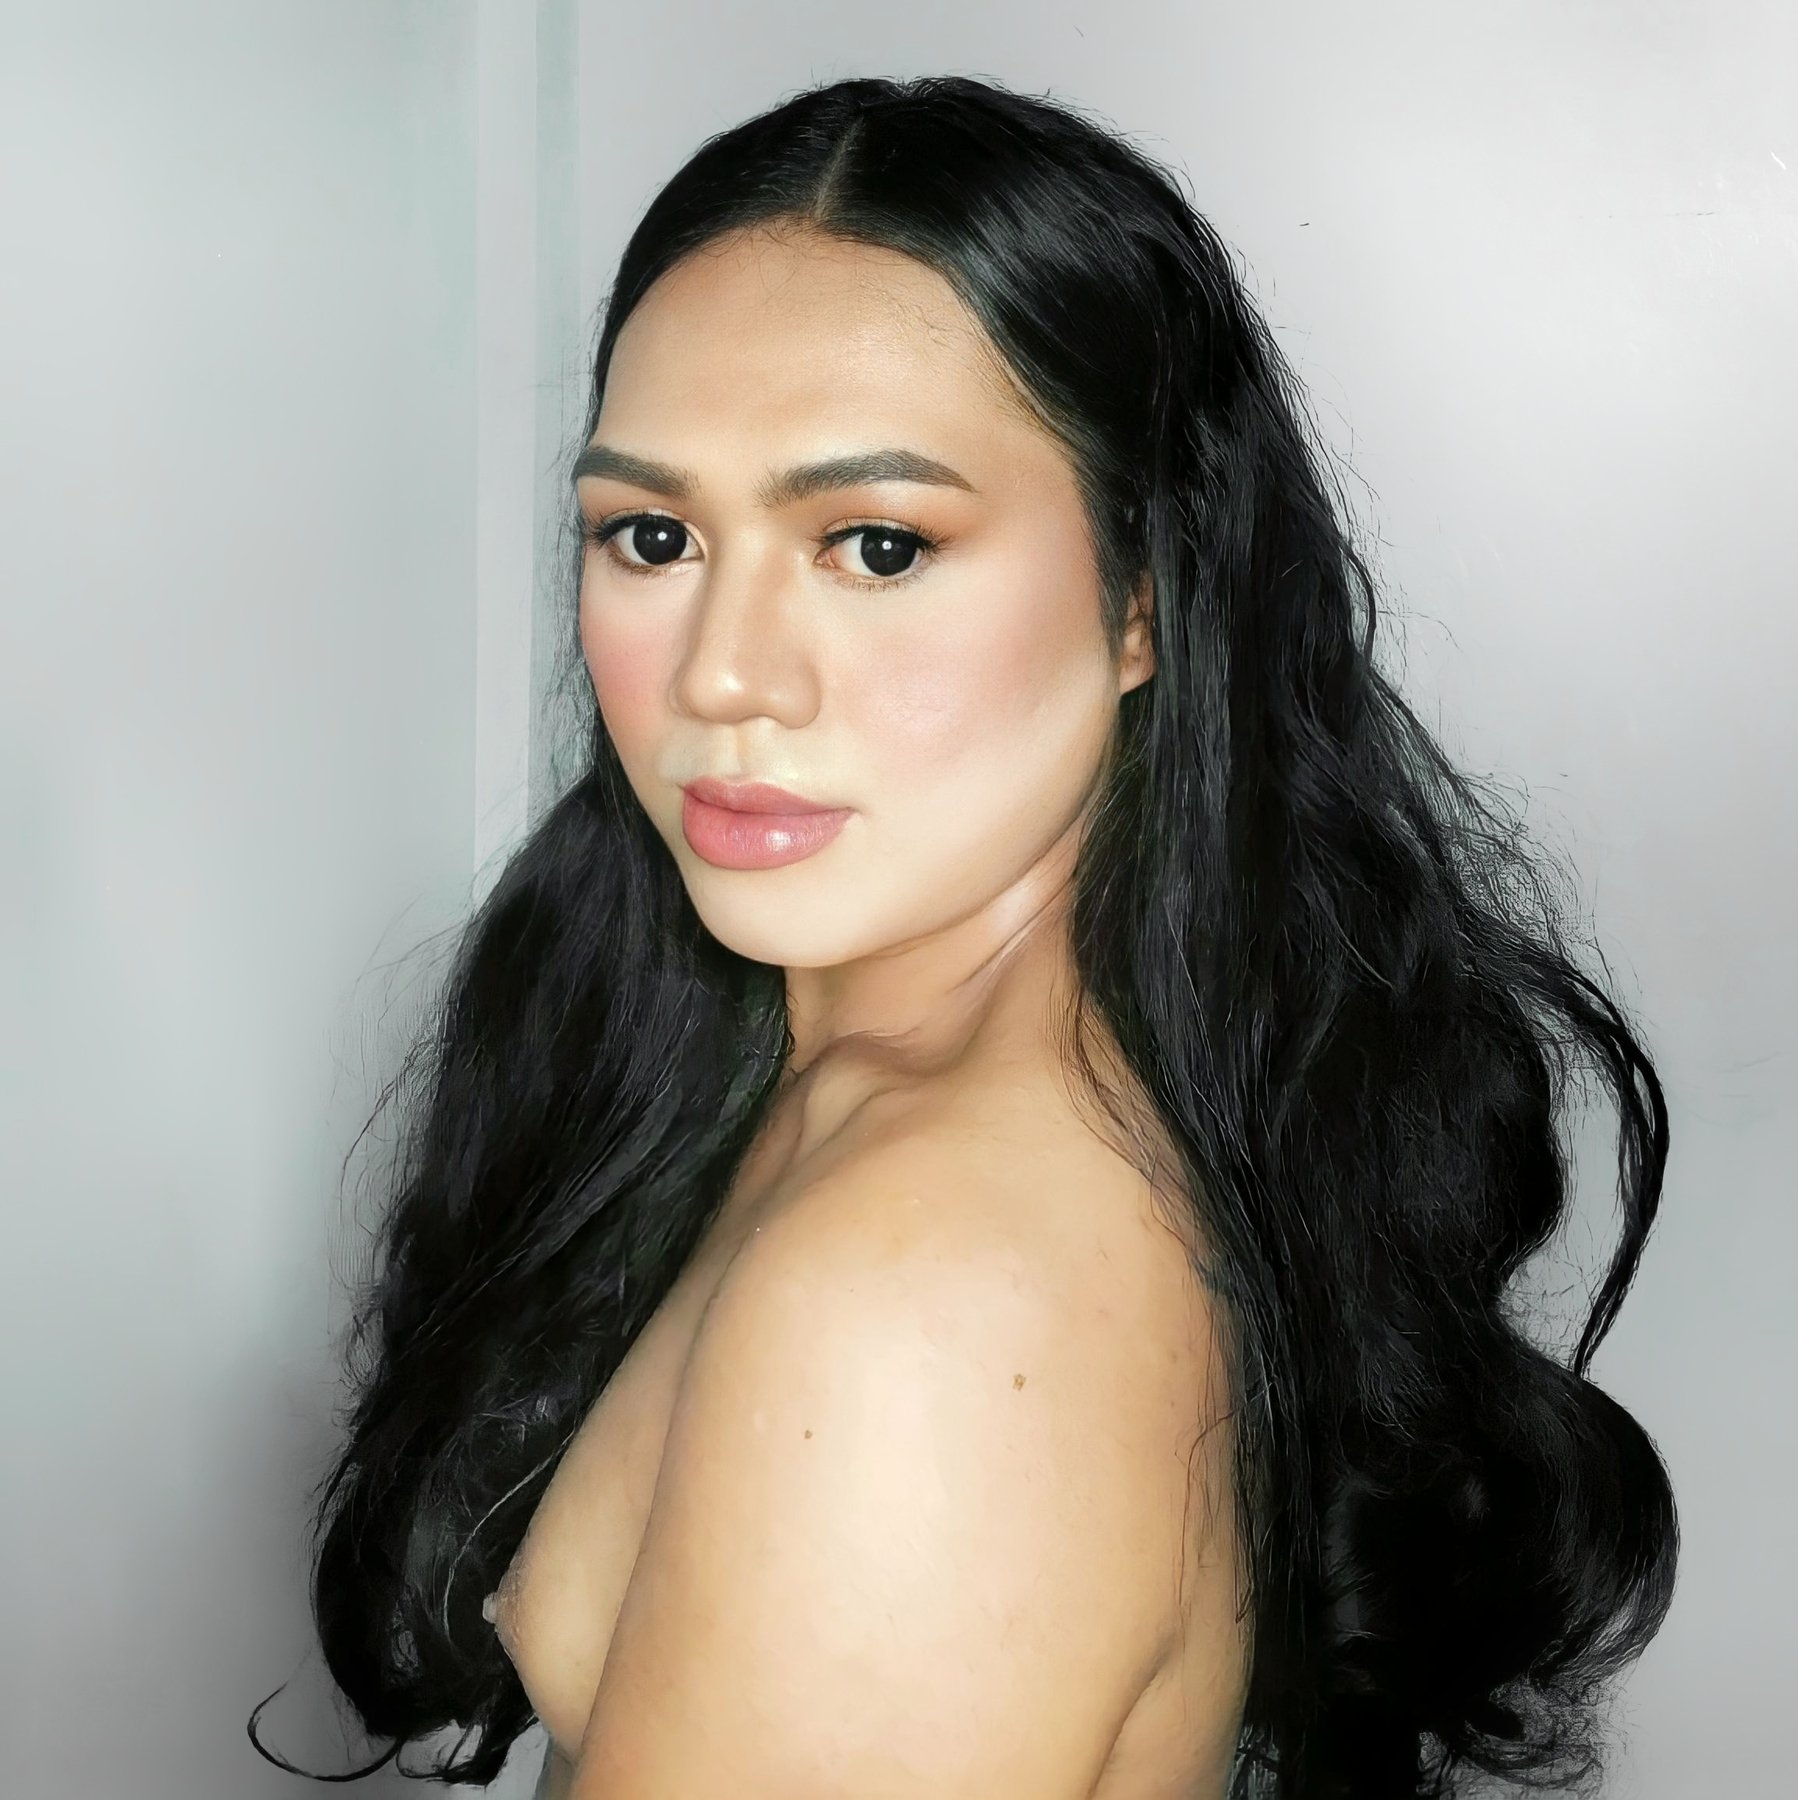 Marie Filipino Transsexual Adult Performer In Manila